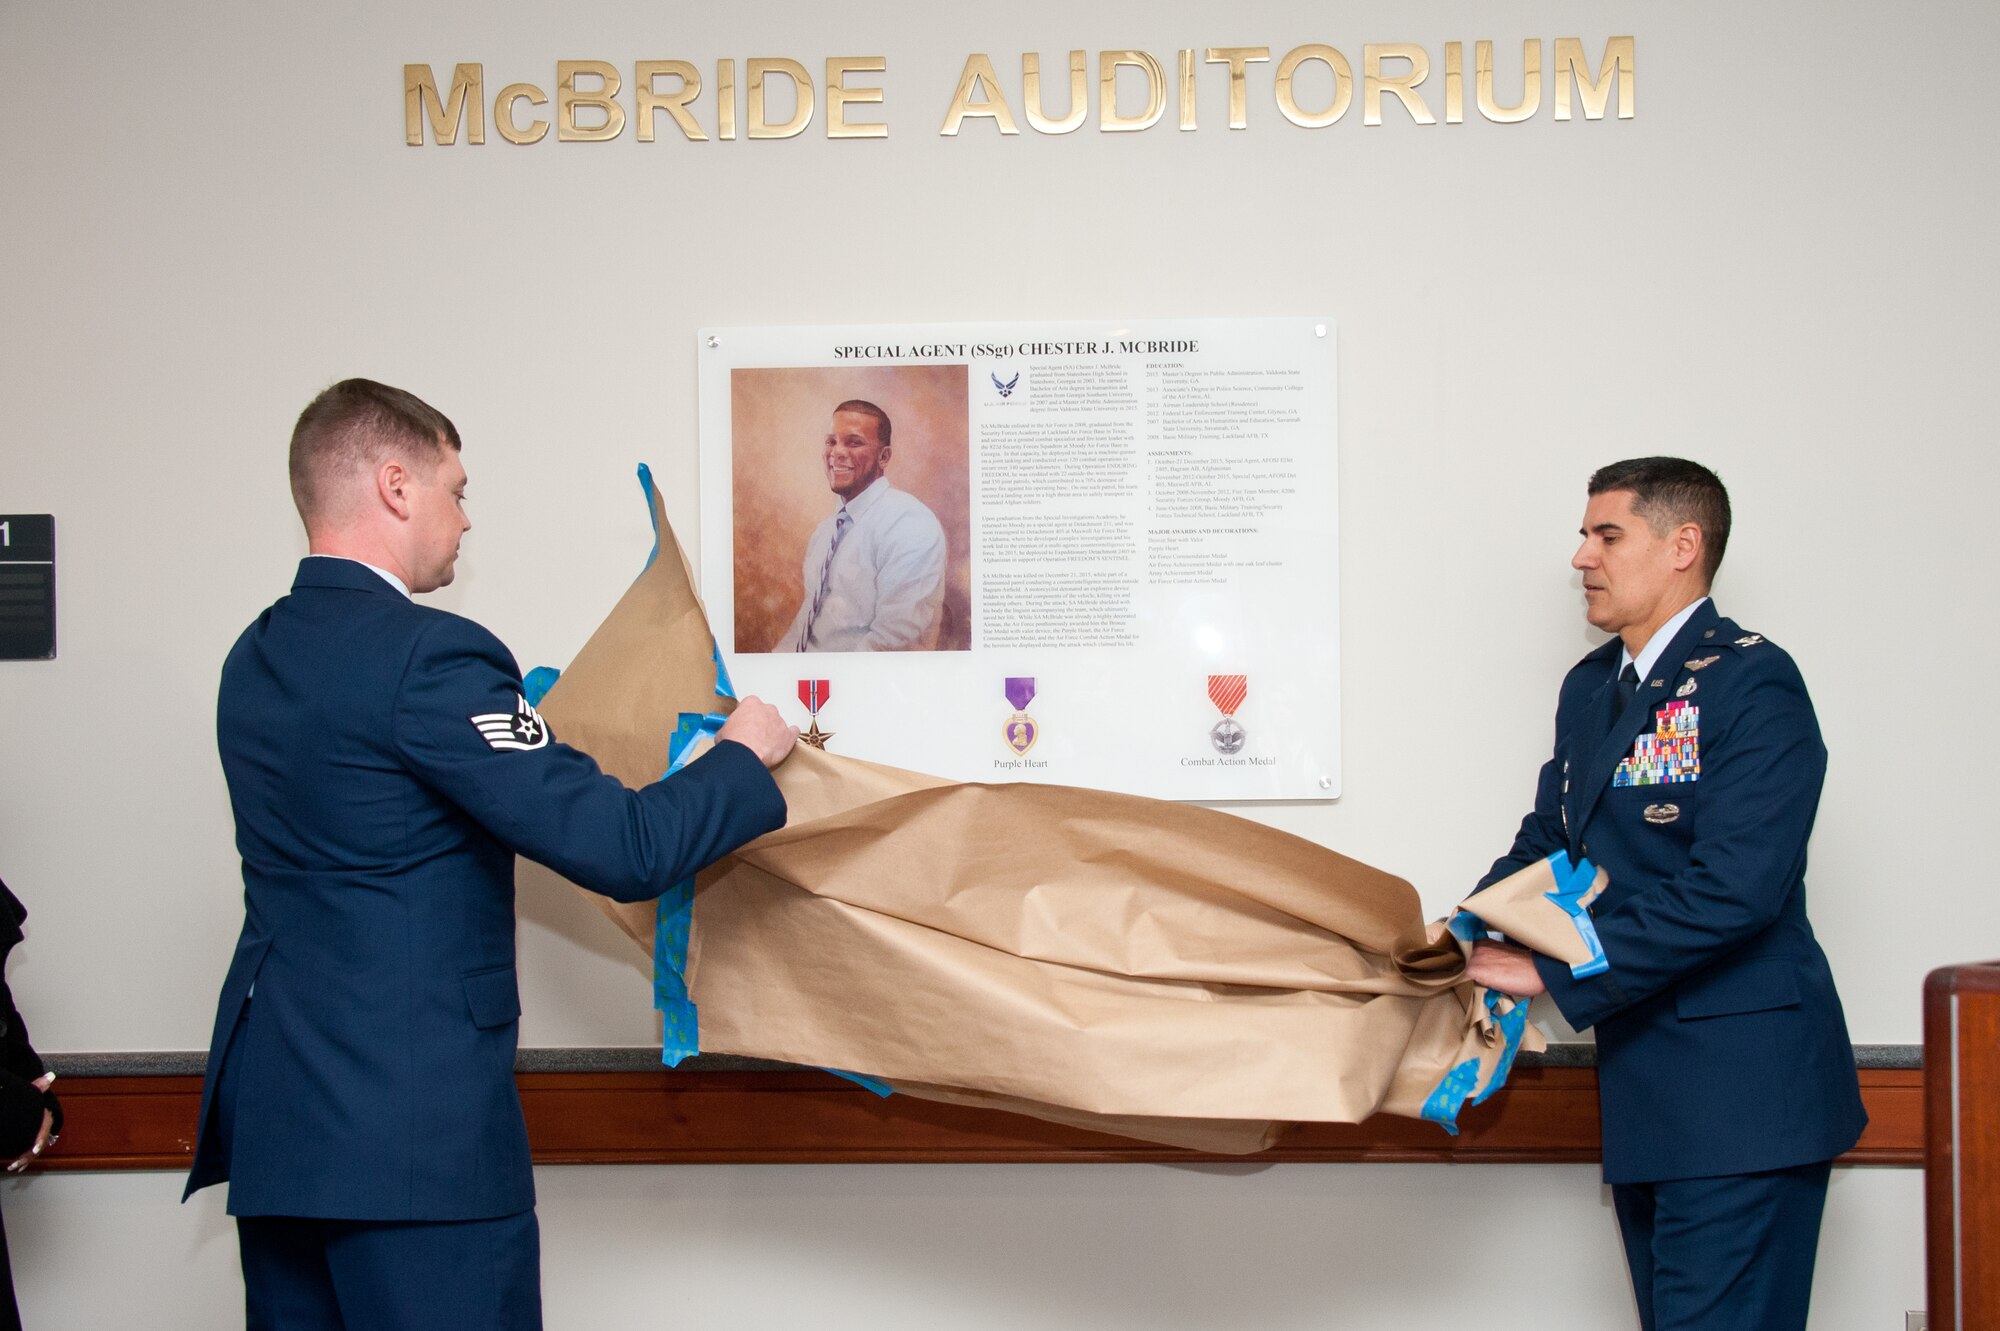 Maxwell AFB, Ala. - Colonel Eric Shafa, Commander, 42d Air Base Wing, and Staff Sergeant Joshua Williams, 42d Contracting Squadron, dedicate room NW201 in 42ABW headquarters building 804 as the McBride Auditorium, Dec. 21, 2016. Special Agent and Staff Sergeant Chester McBride was killed while protecting his interpreter from a suicide bomber near Bagram Air Base, Afghanistan on Dec. 21, 2015. McBride was assigned to the Air Force Office of Special Investigations, Detachment 405, Maxwell AFB.  (US Air Force photo by Melanie Rodgers Cox/Released)